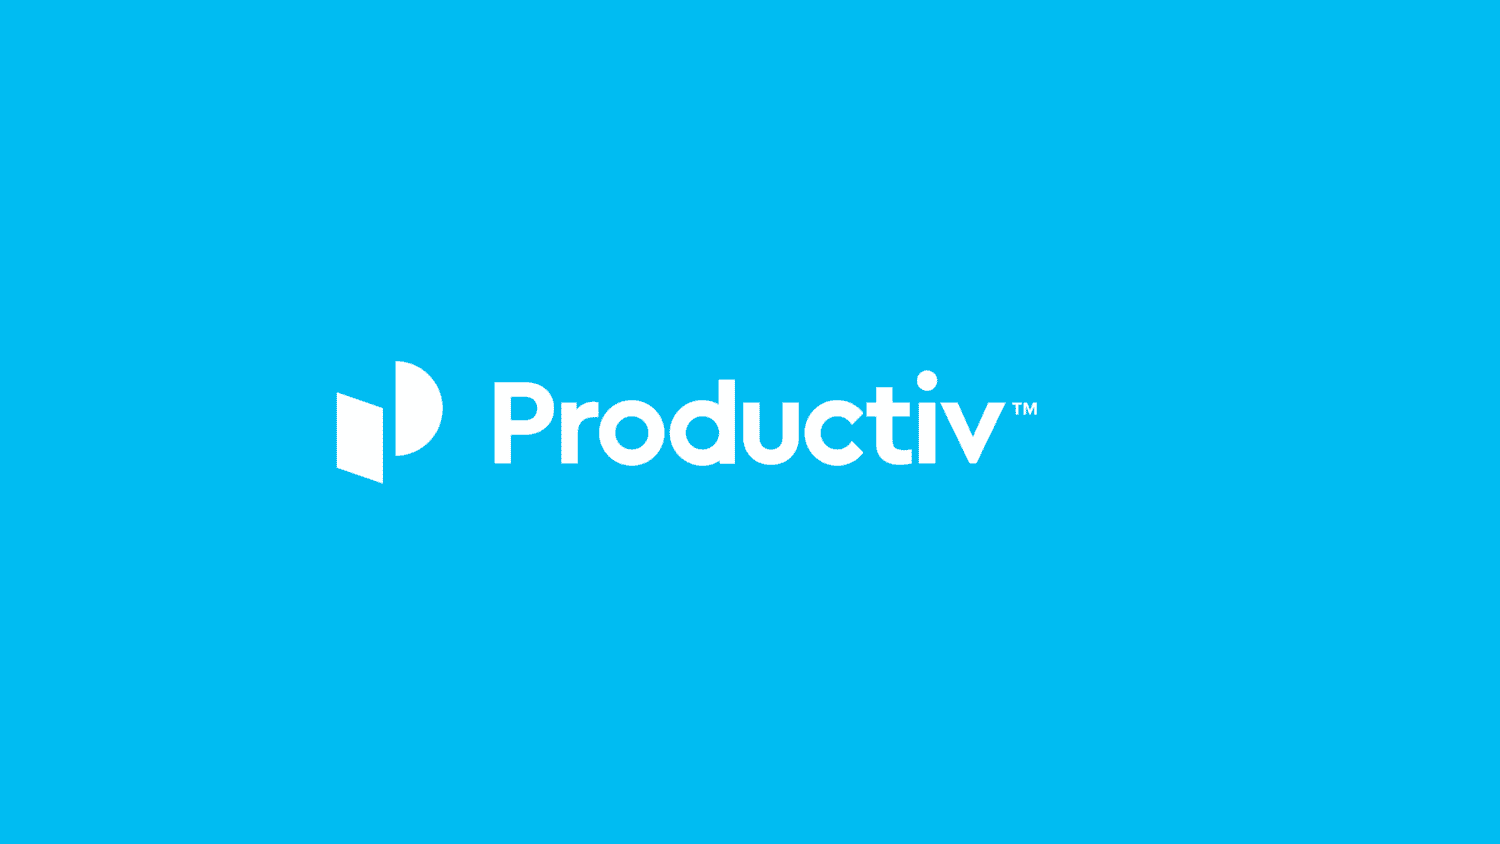 Full Speed Ahead! Productiv Closes $20M in Series B Funding